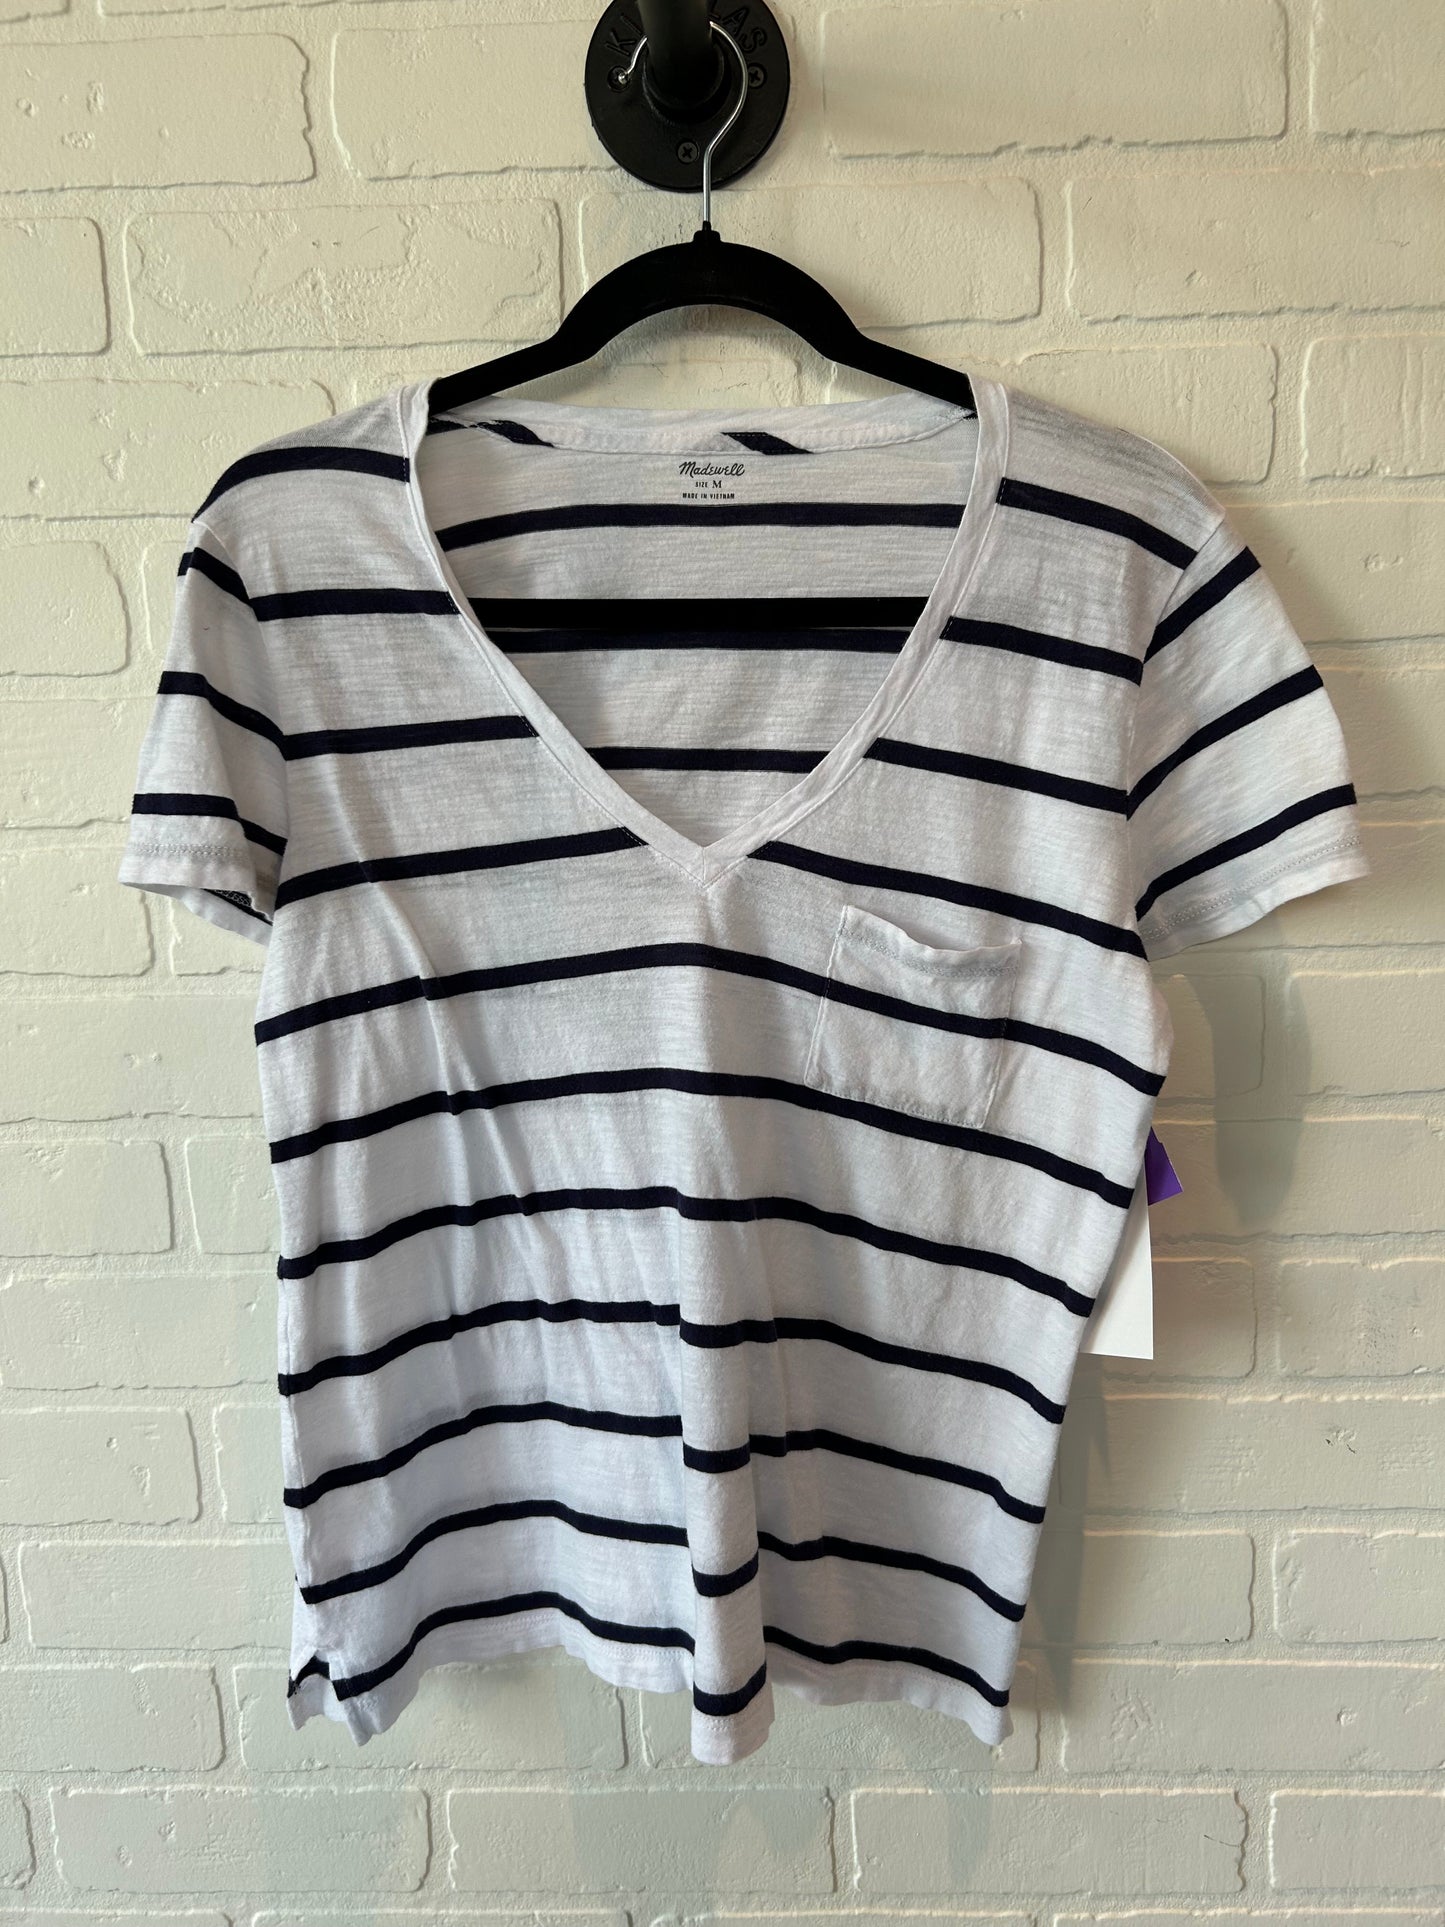 Blue & White Top Short Sleeve Madewell, Size M